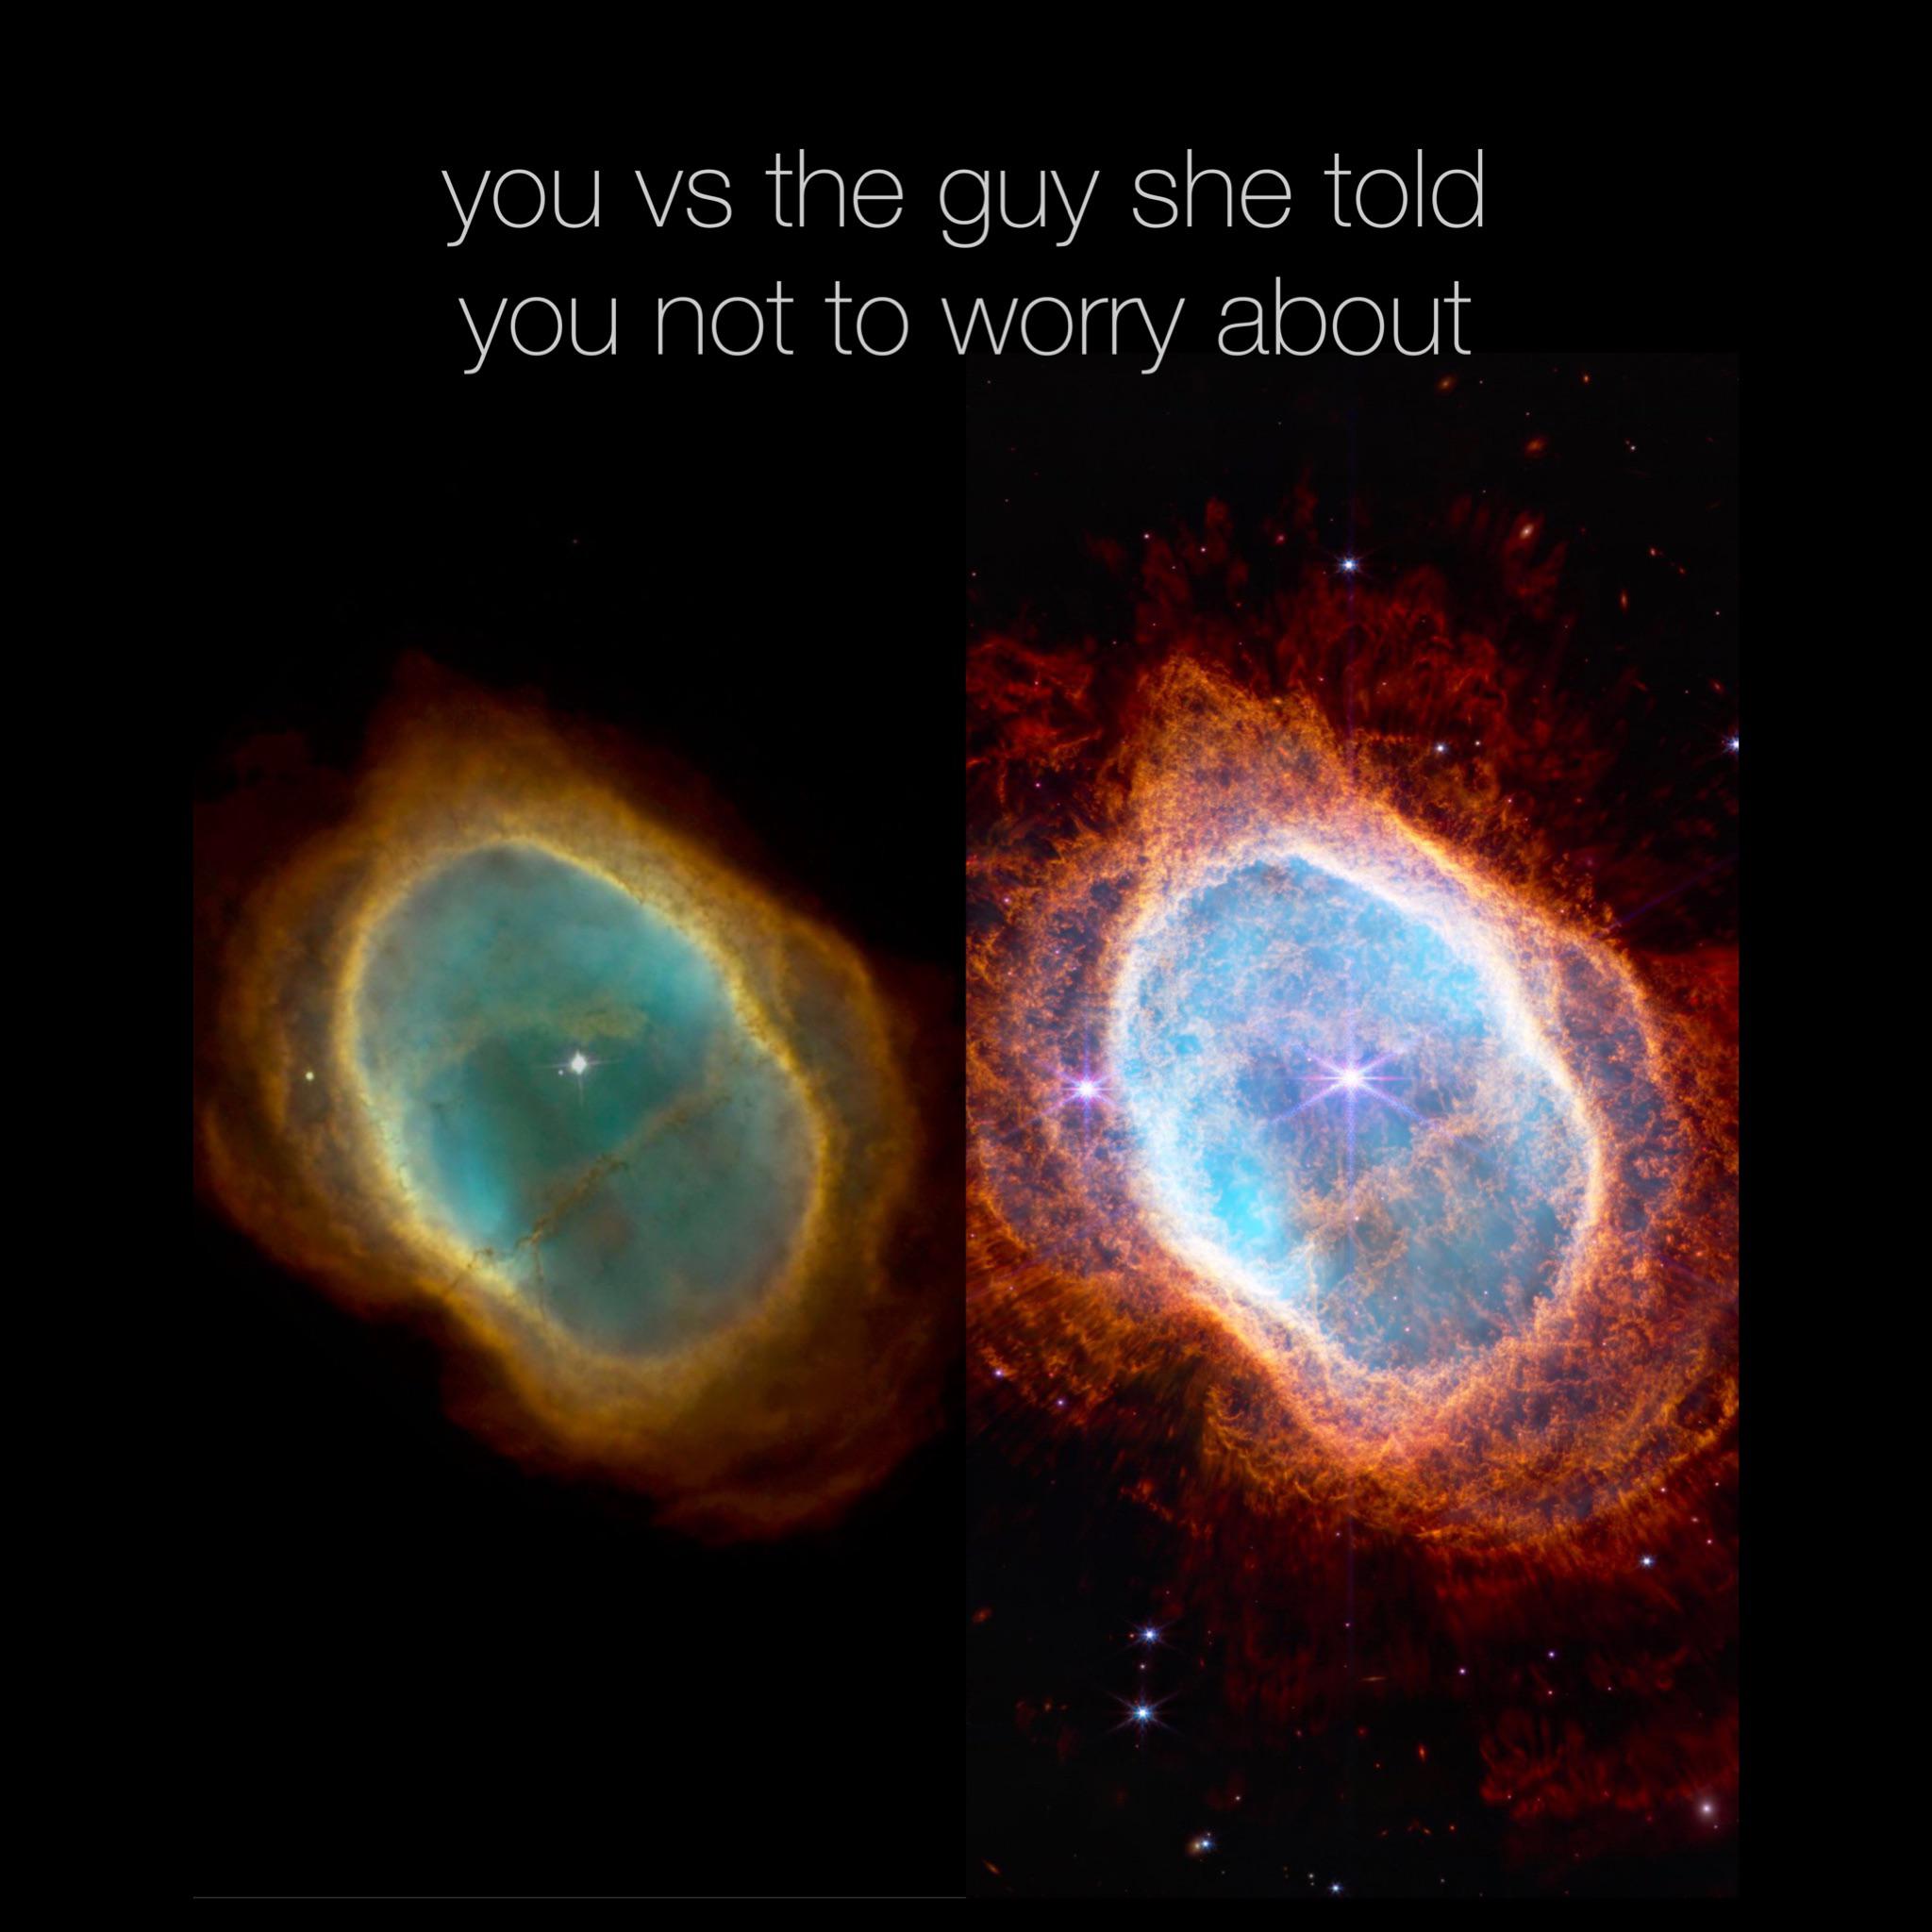 dank memes - ngc 3132 - you vs the guy she told you not to worry about